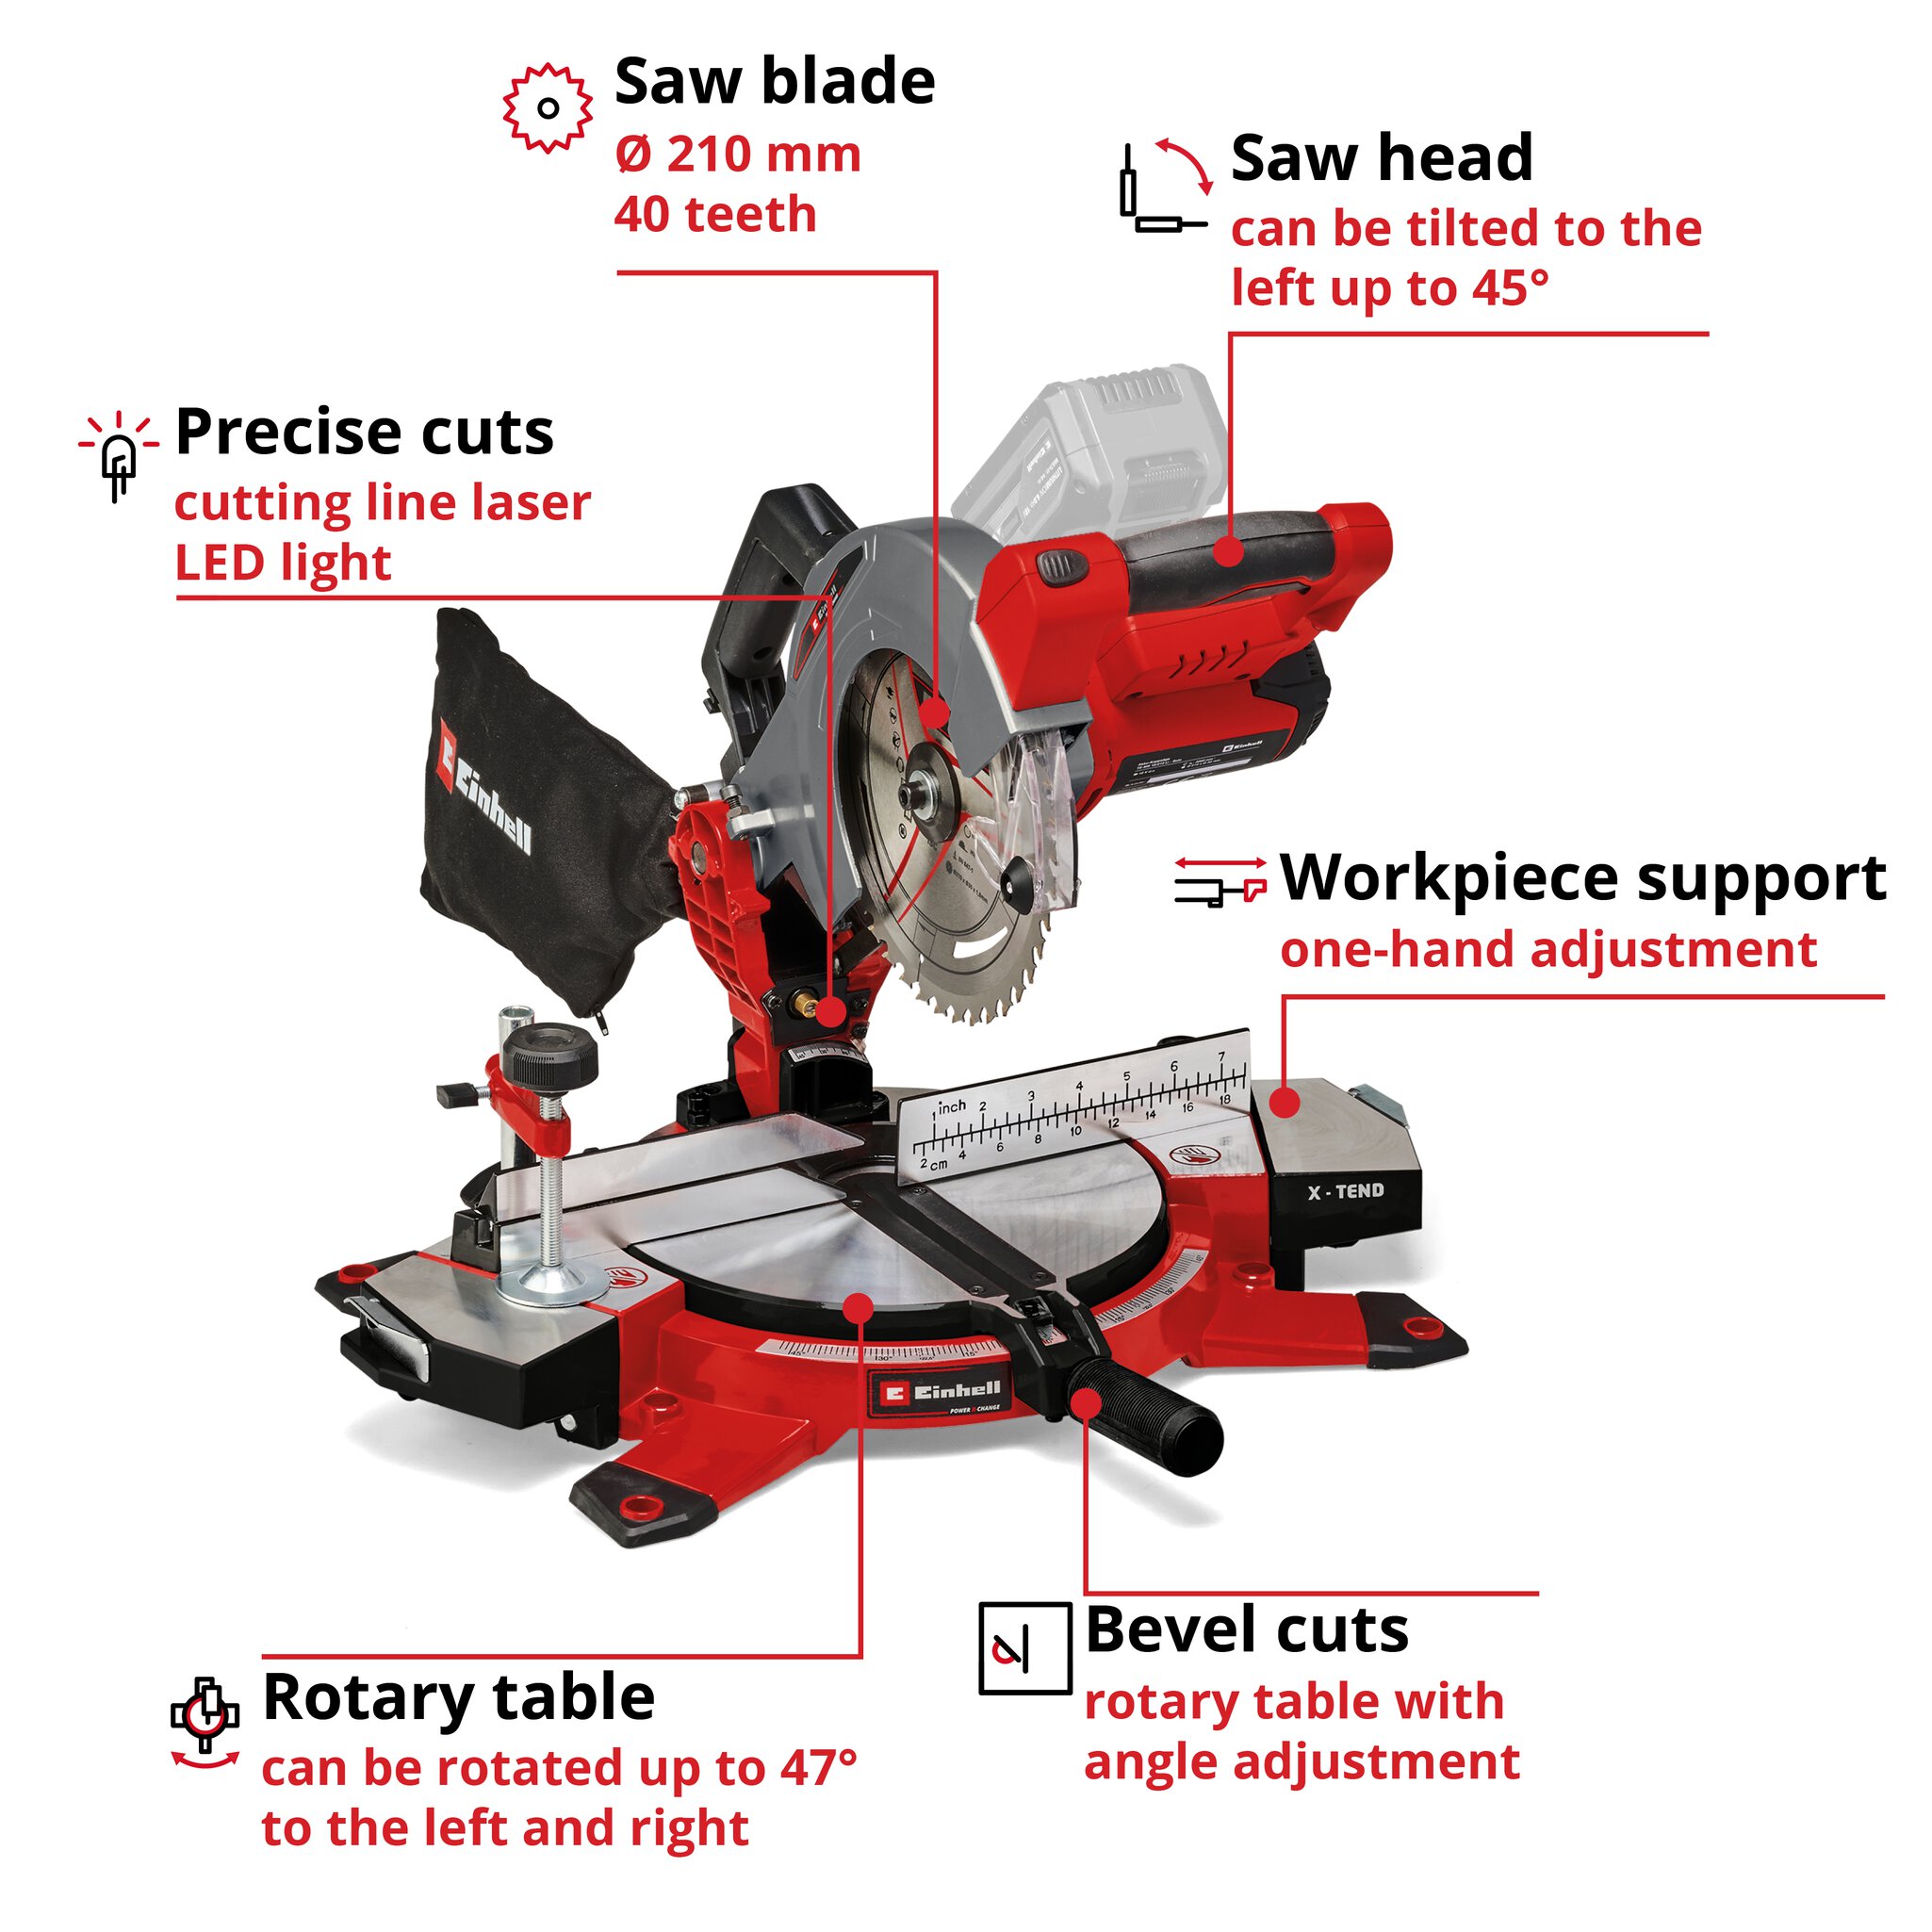 einhell-expert-cordless-mitre-saw-4300890-key_feature_image-001